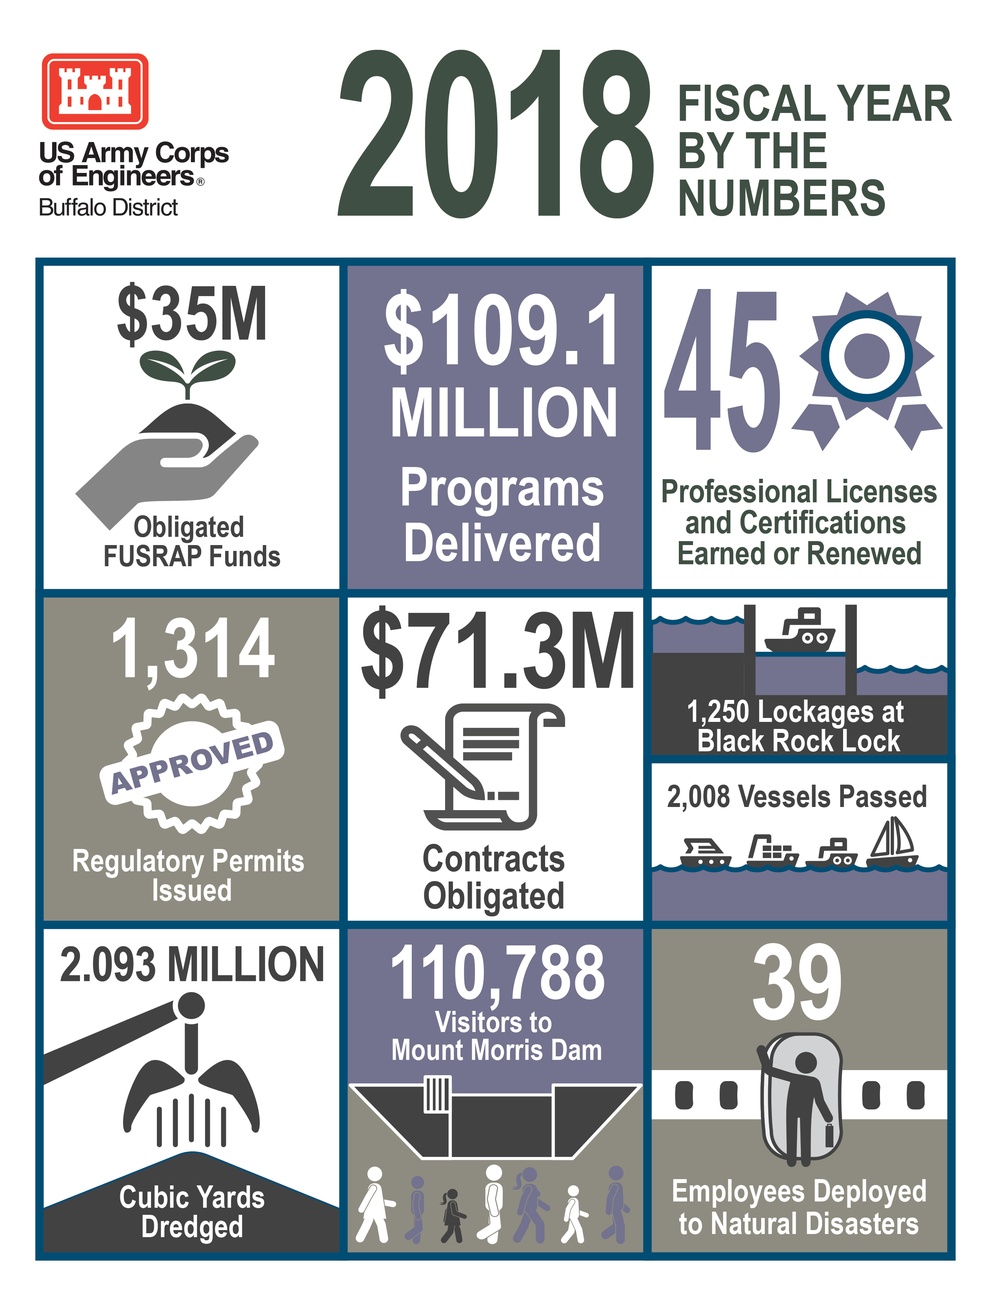 2018 Fiscal Year by the Numbers